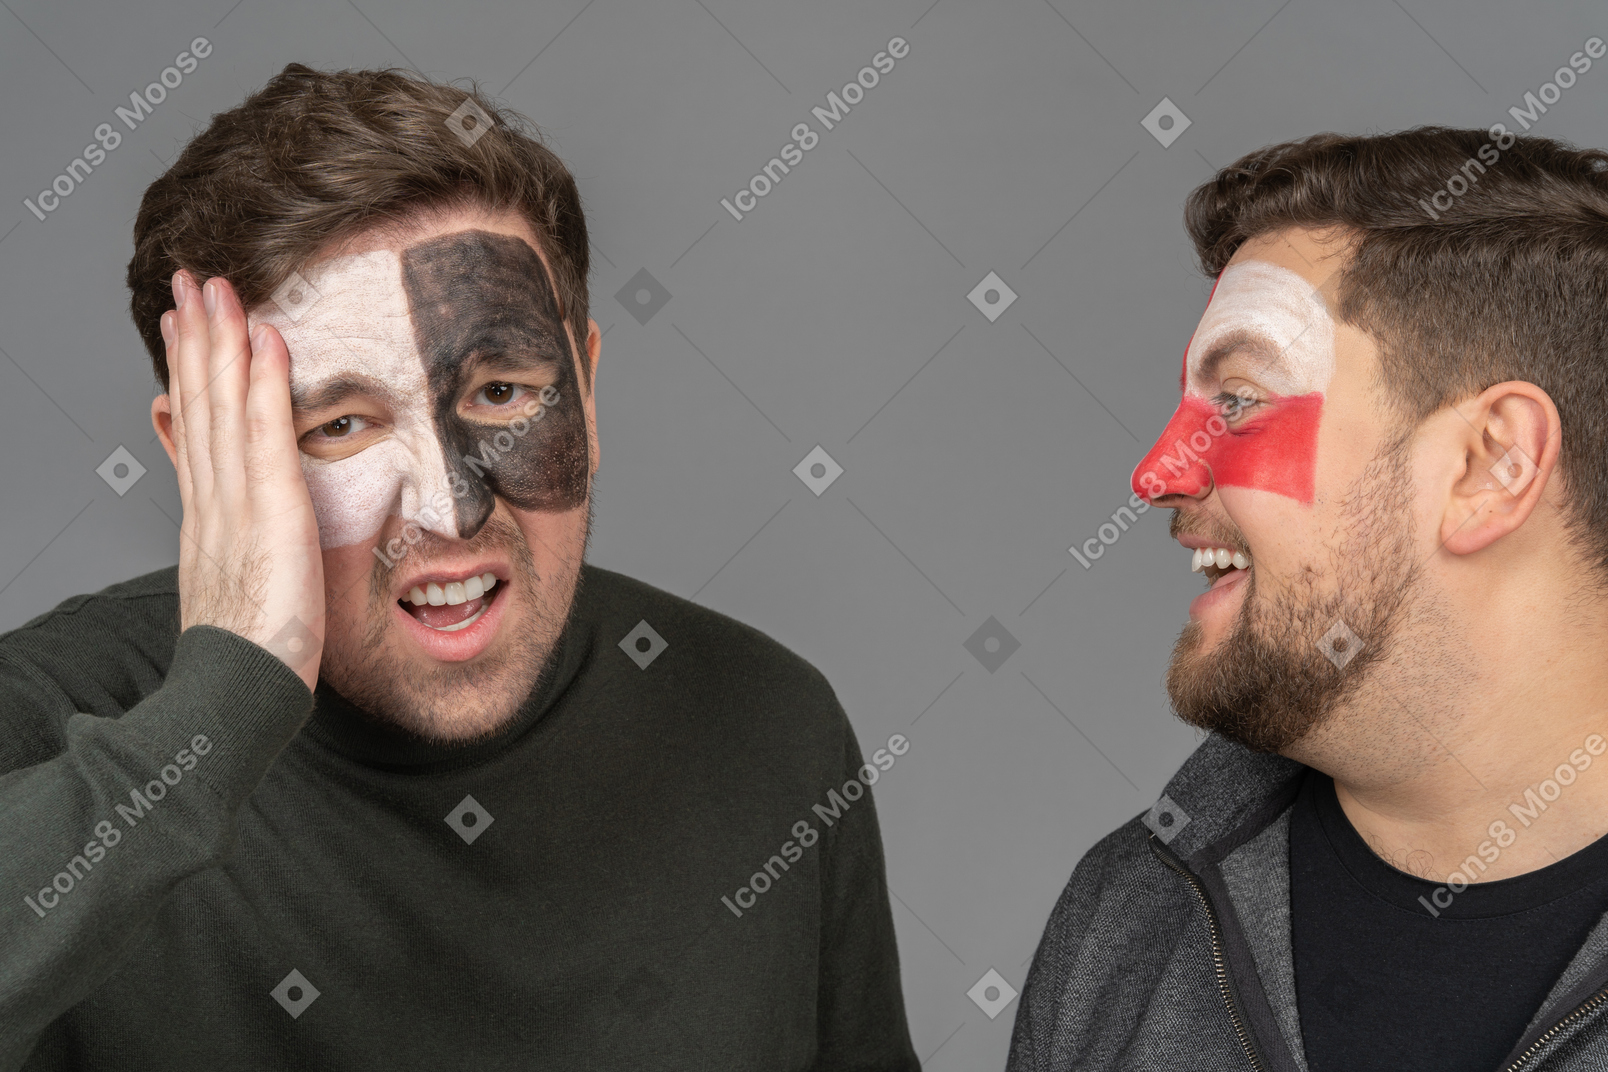 Front view of two male football fans sharing their emotions